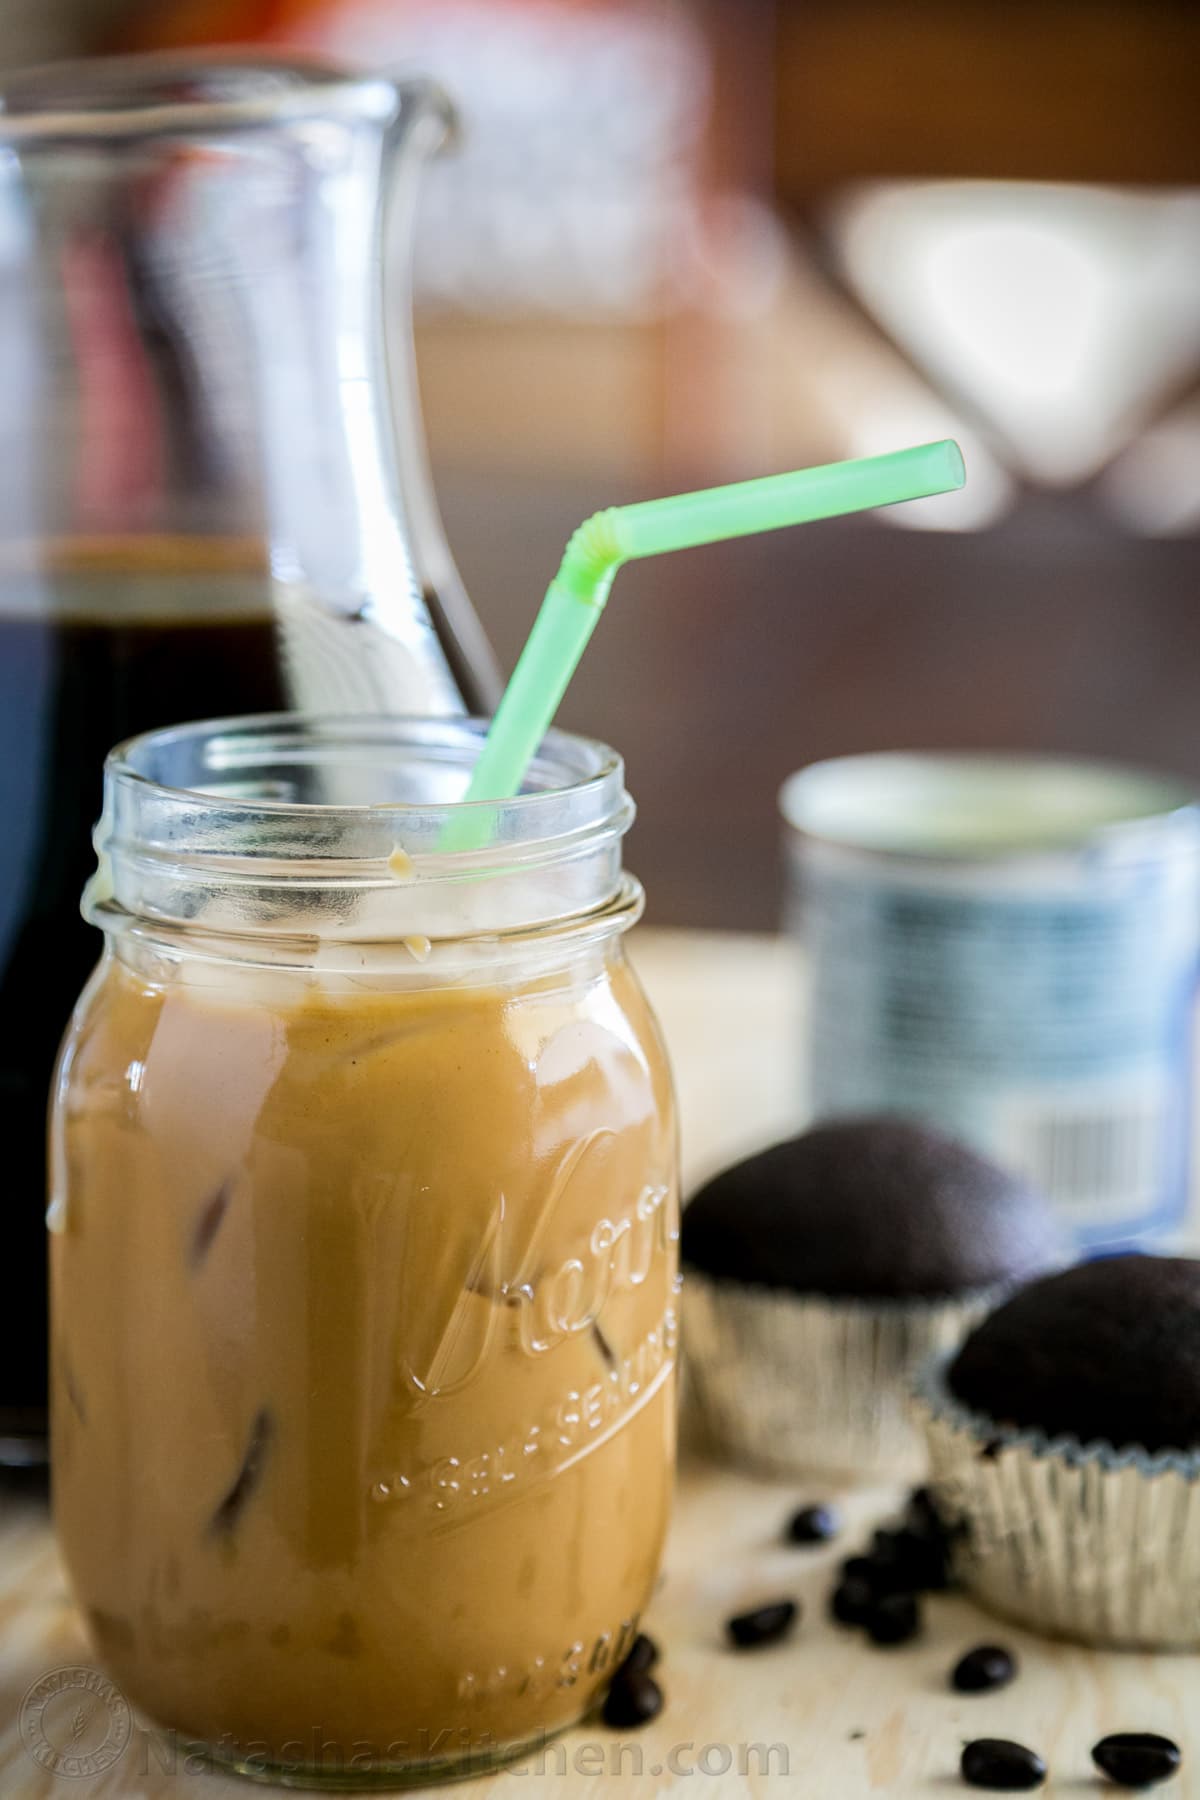 Iced Coffee with Condensed Milk Recipe